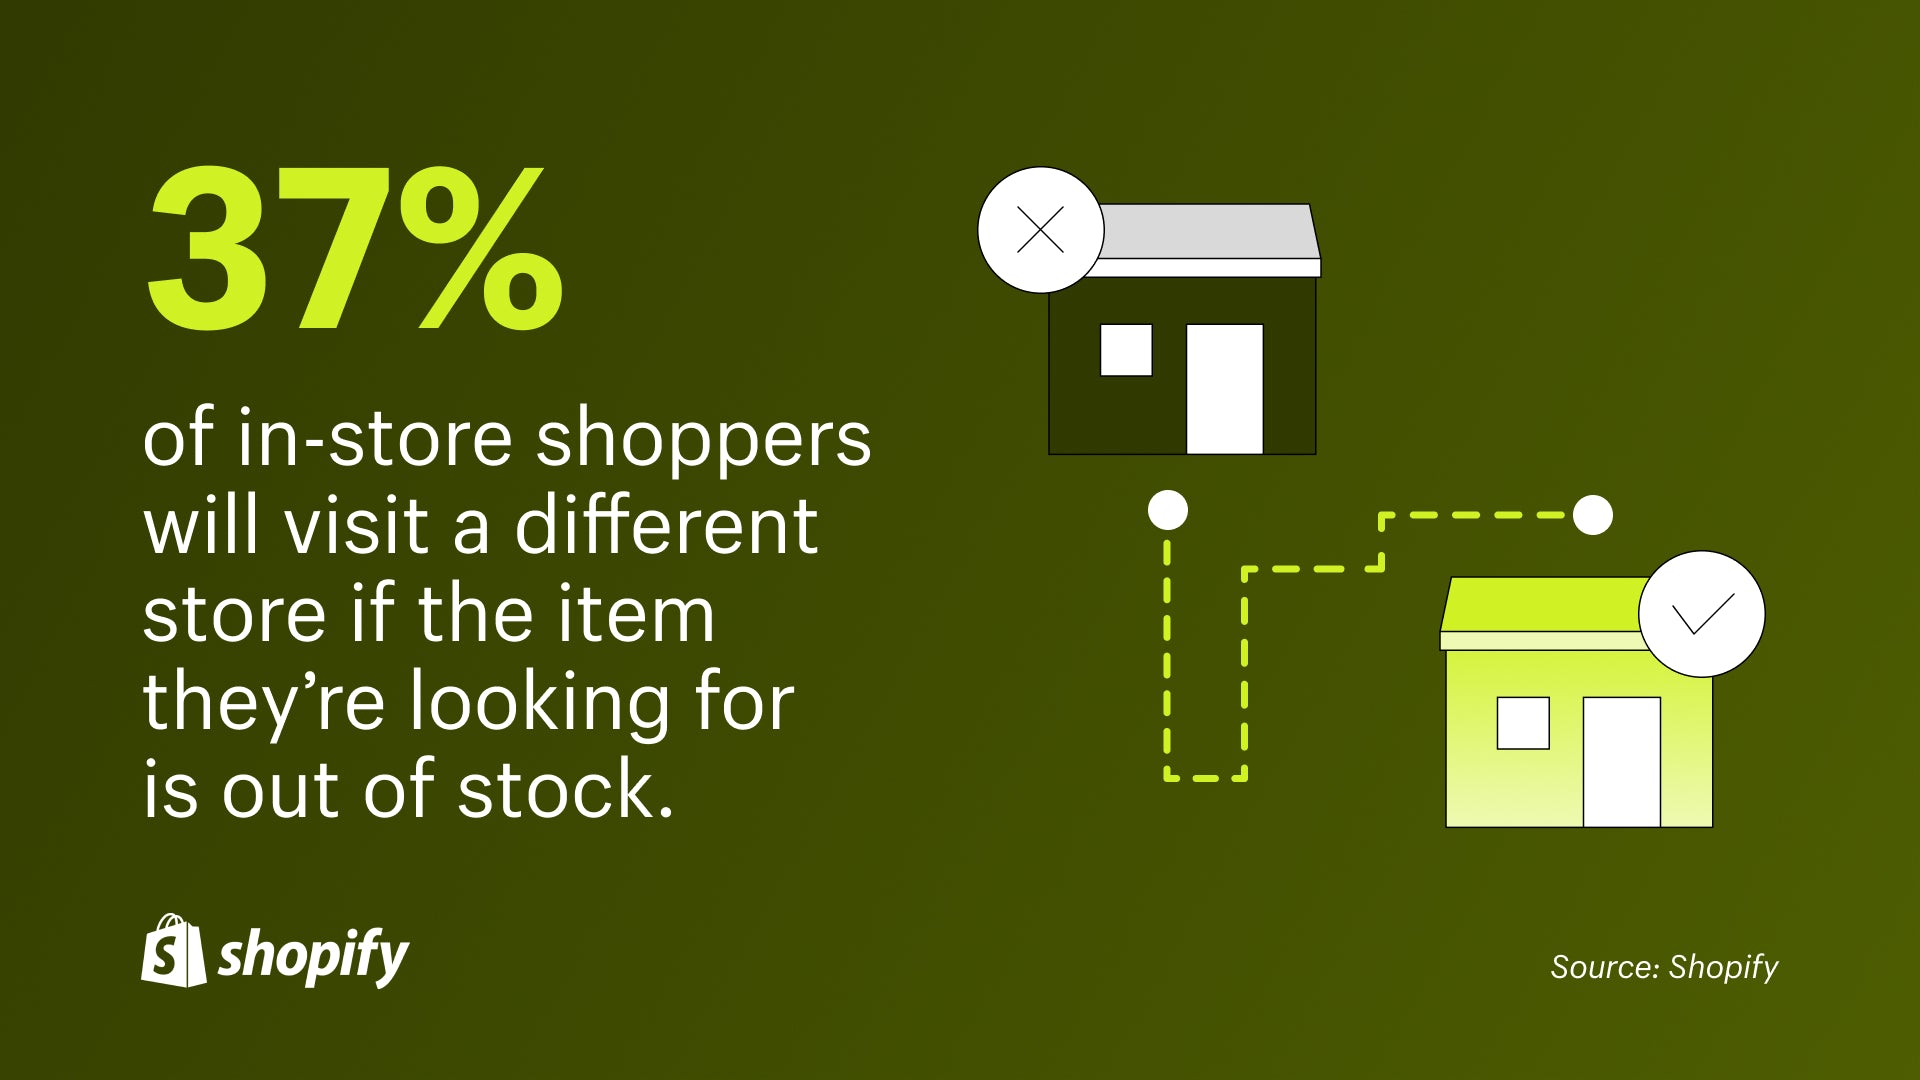 Image with green background and on the right is a cartoon image of a store and a dotted line to a home. A fact on the left reads, '37% of in-store shoppers will visit a different store if the item they're looking for is out of stock.'